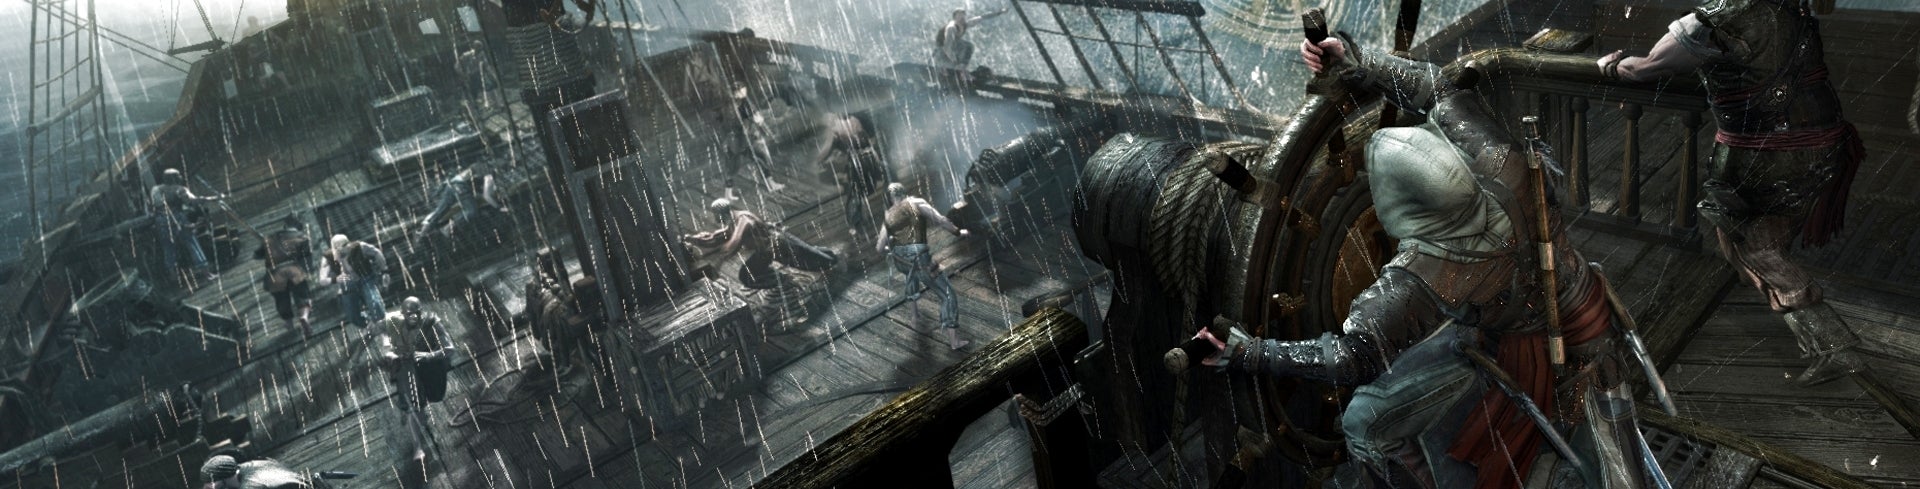 Immagine di Assassin's Creed IV: Black Flag PC - review